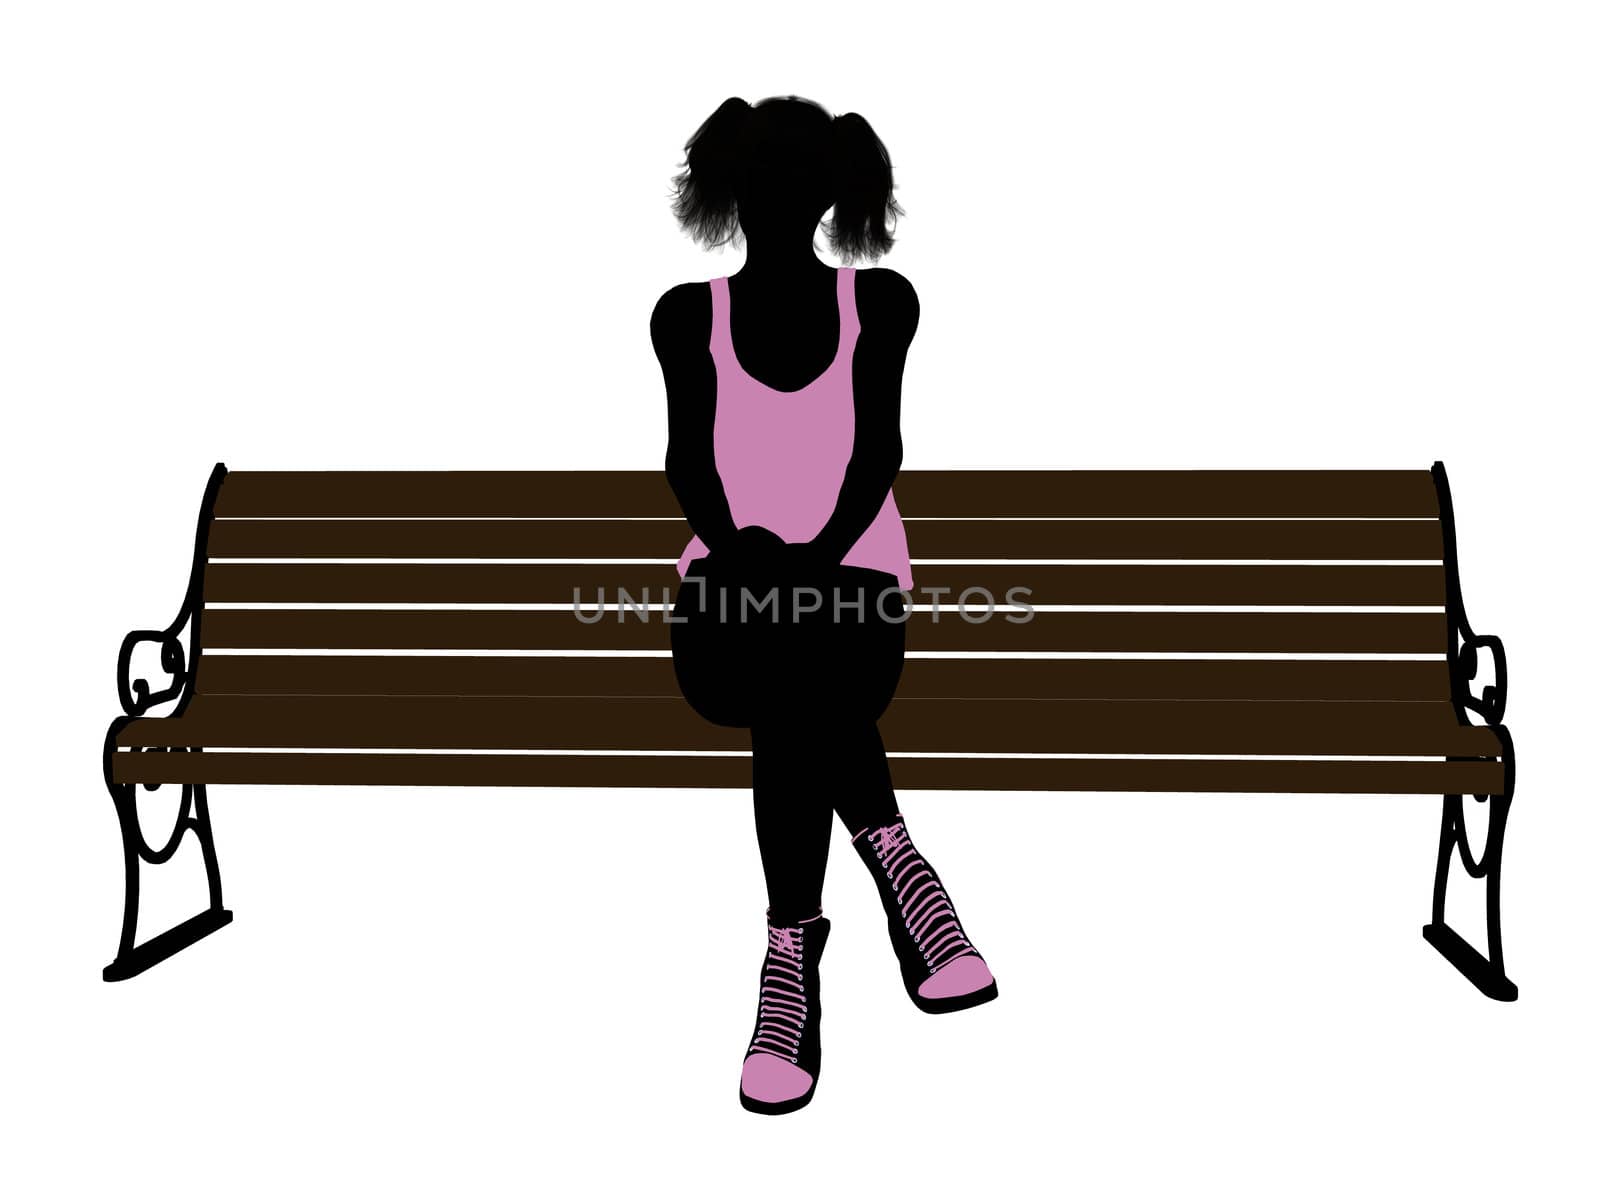 Female athlete sitting on a bench silhouette on a white background